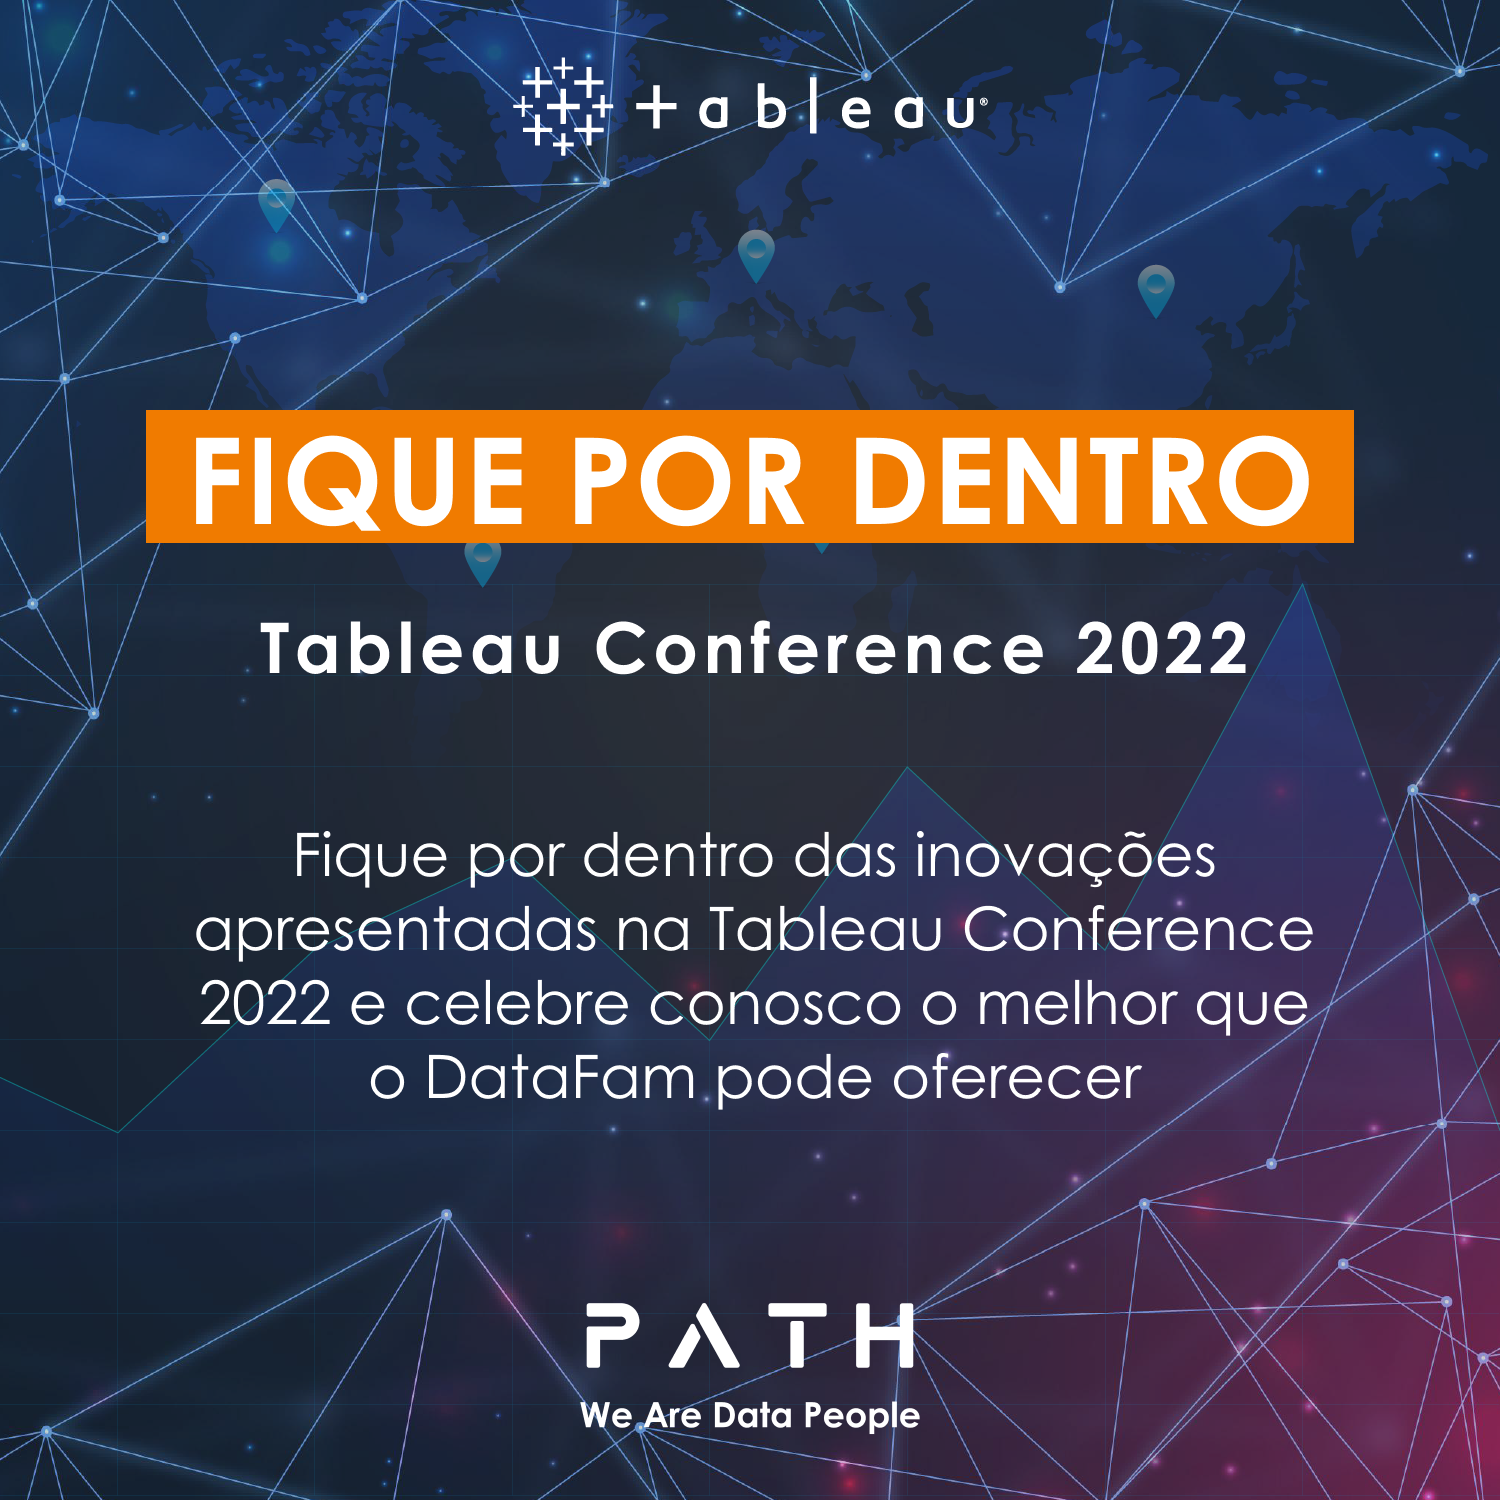 Tableau Conference 2022